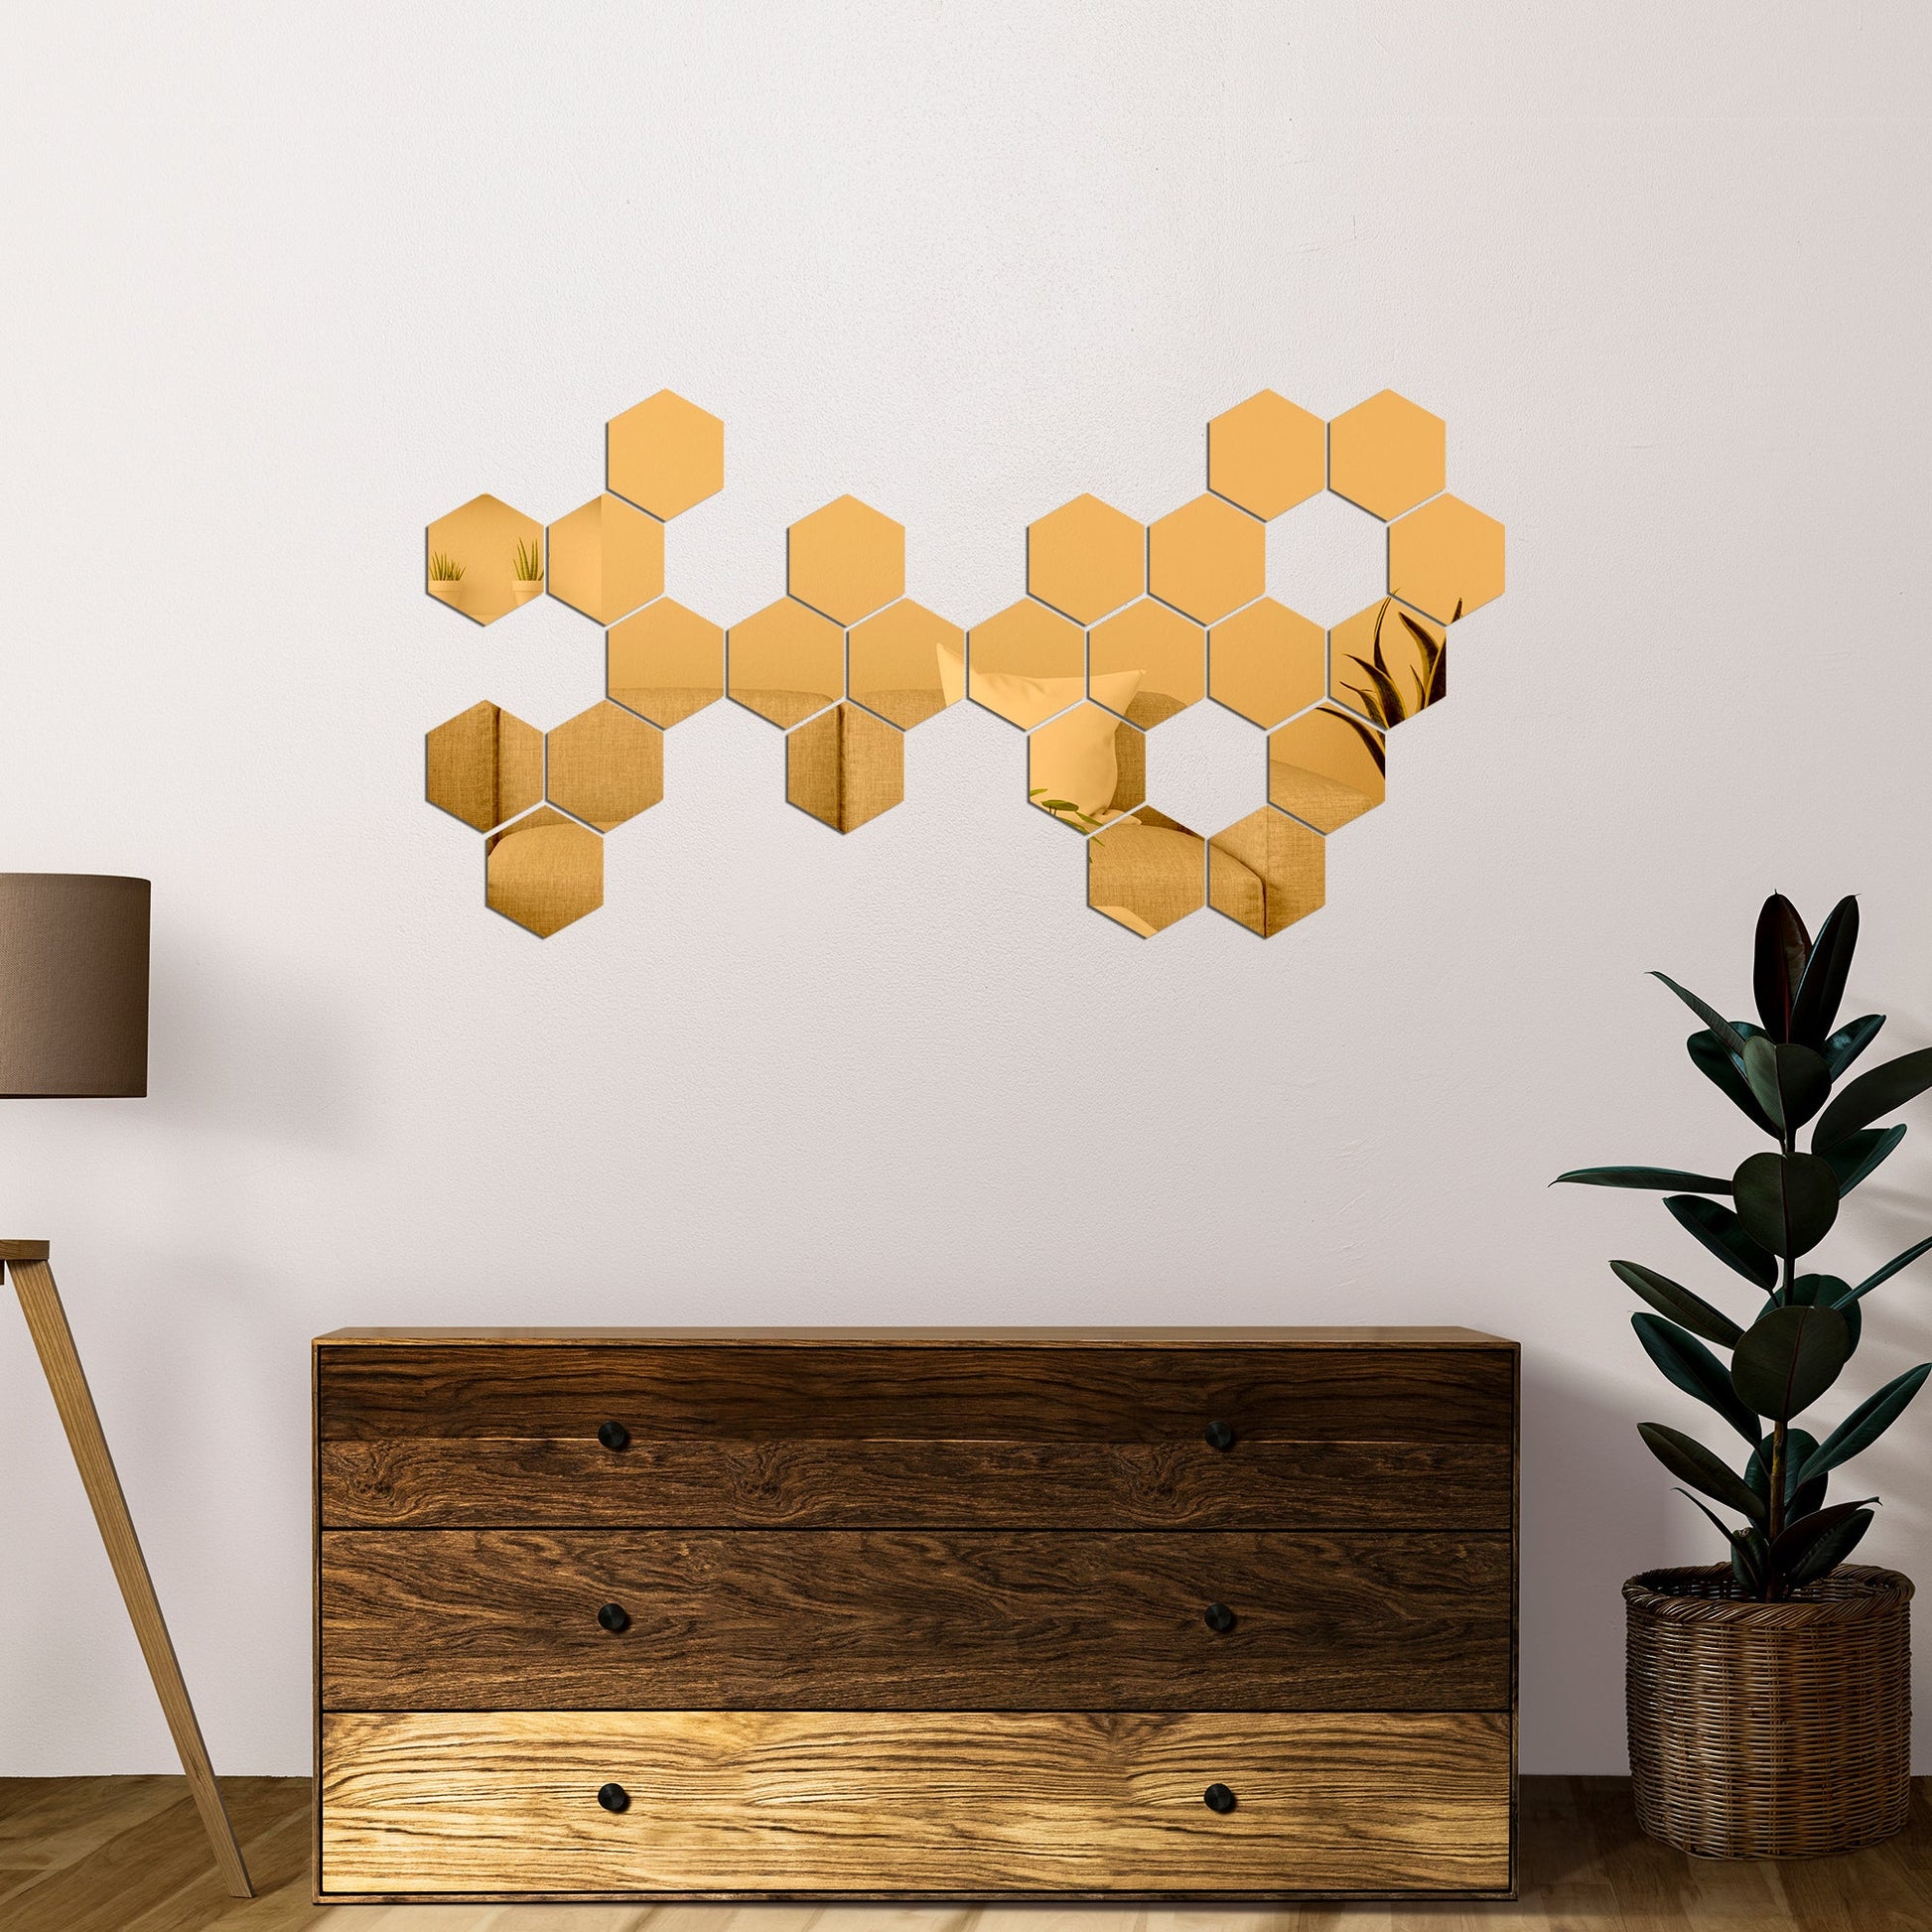 12 Hexagon Mirror Wall Decal Wall Stickers, Acrylic Mirror for Bedroom  Living Room Decorative Wall Mural 10 